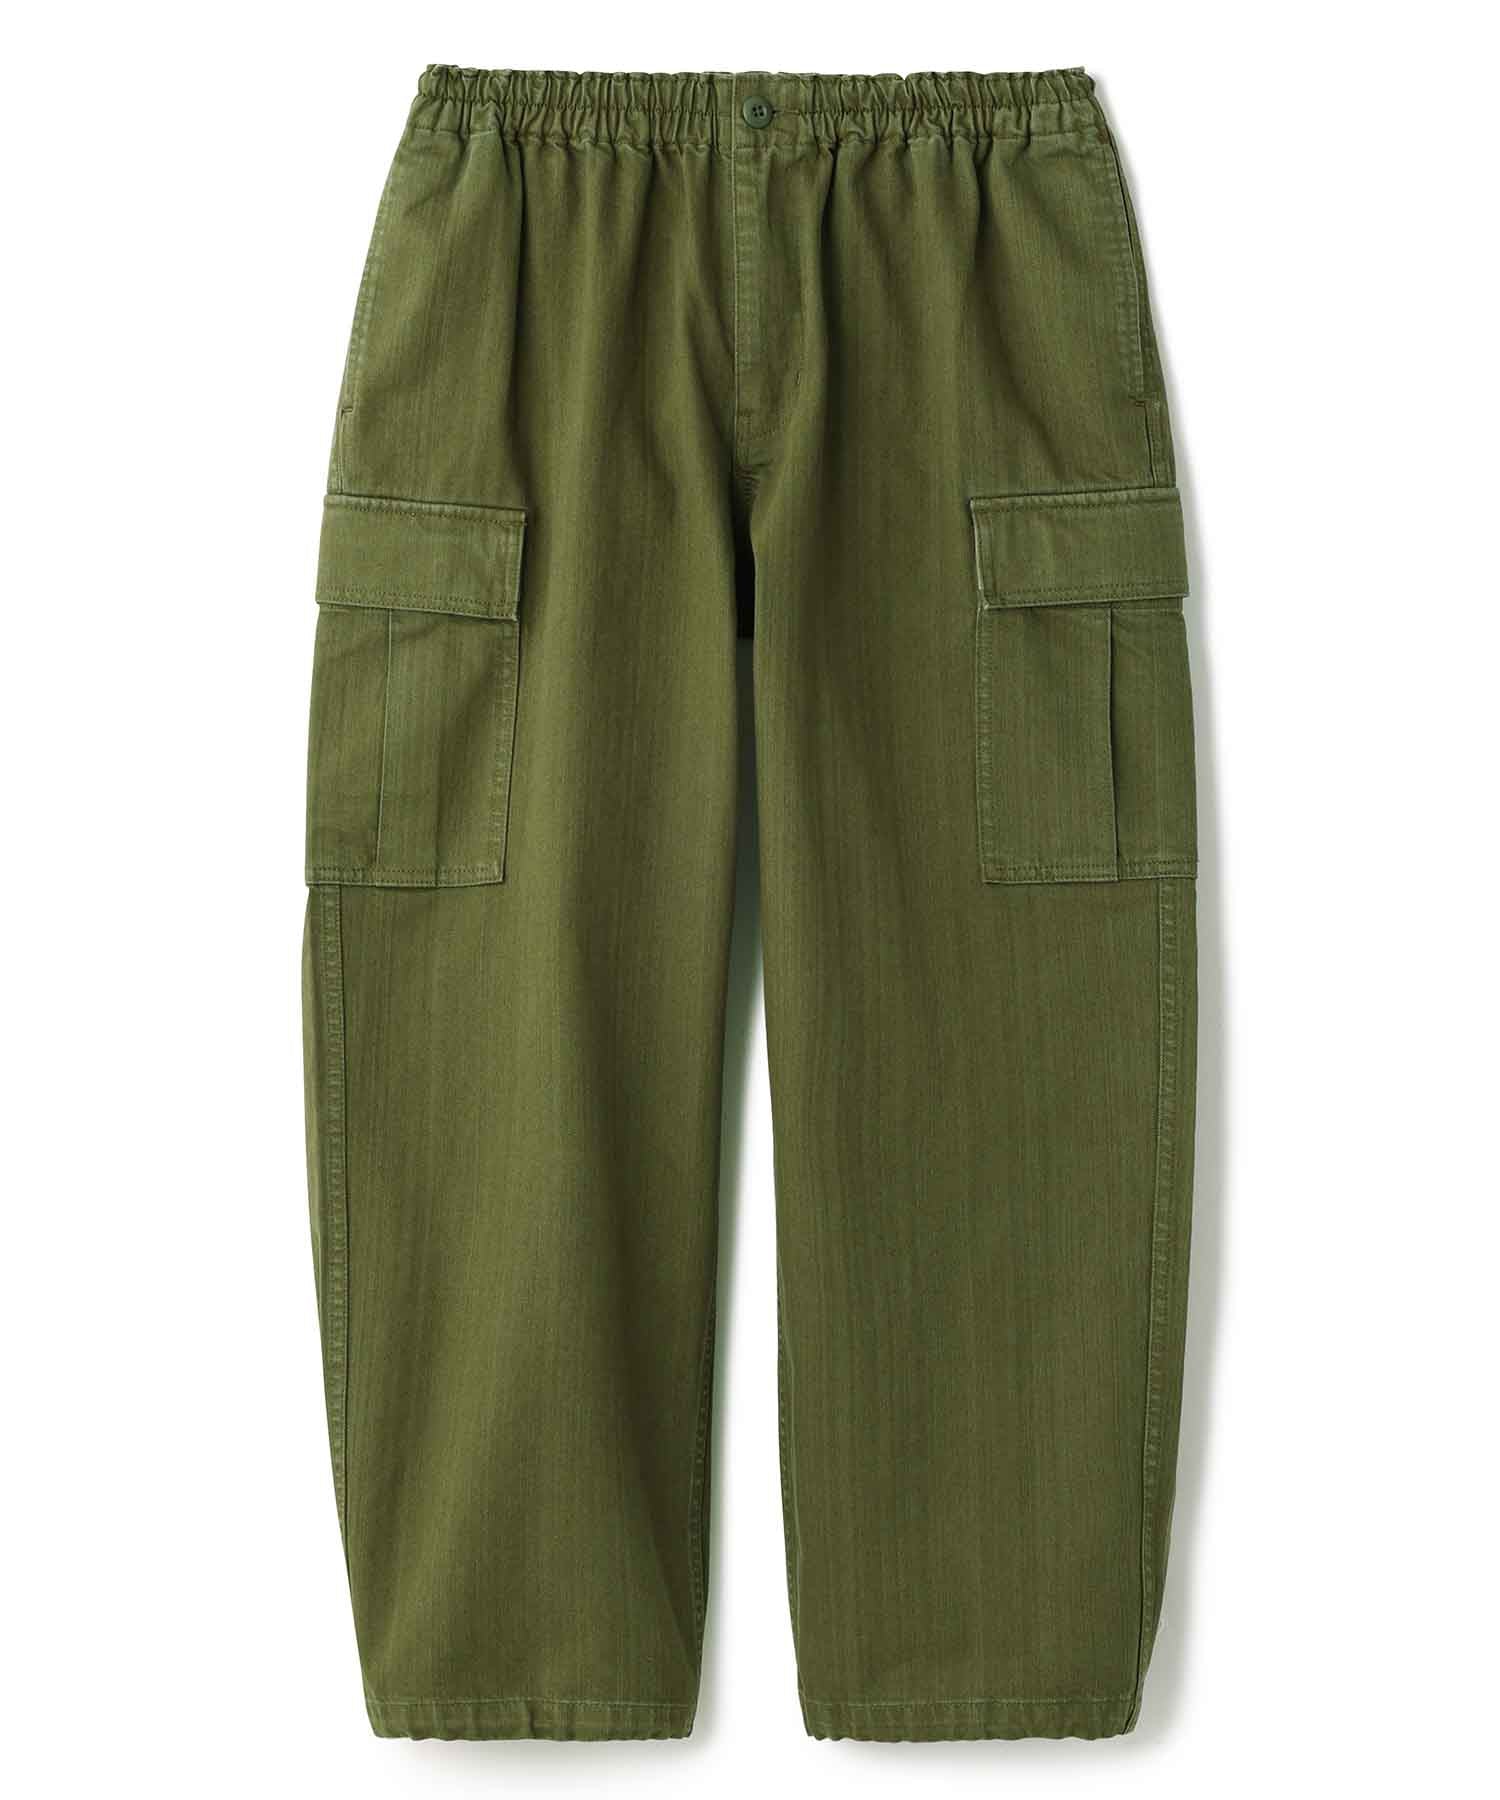  LOLOCCI Green Cargo Pants for Women Baggy Loose Casual